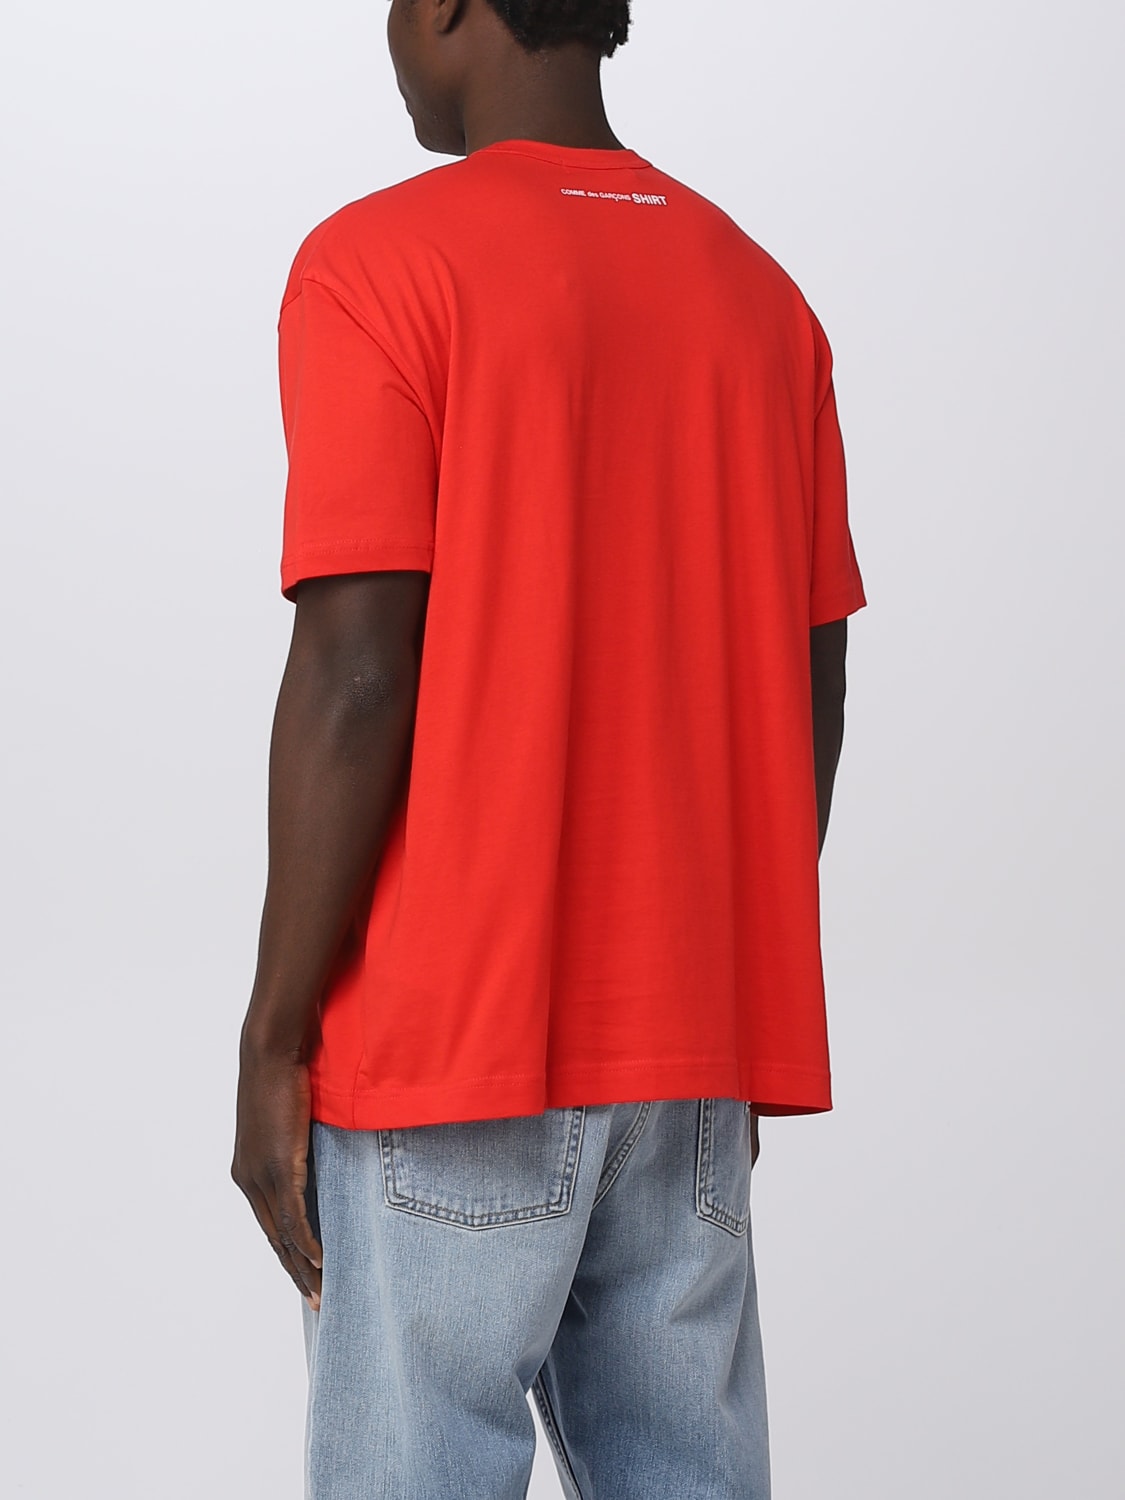 Comme Des Garconsアウトレット：Tシャツ メンズ - レッド | GIGLIO.COMオンラインのComme Des Garcons T シャツ FKT015